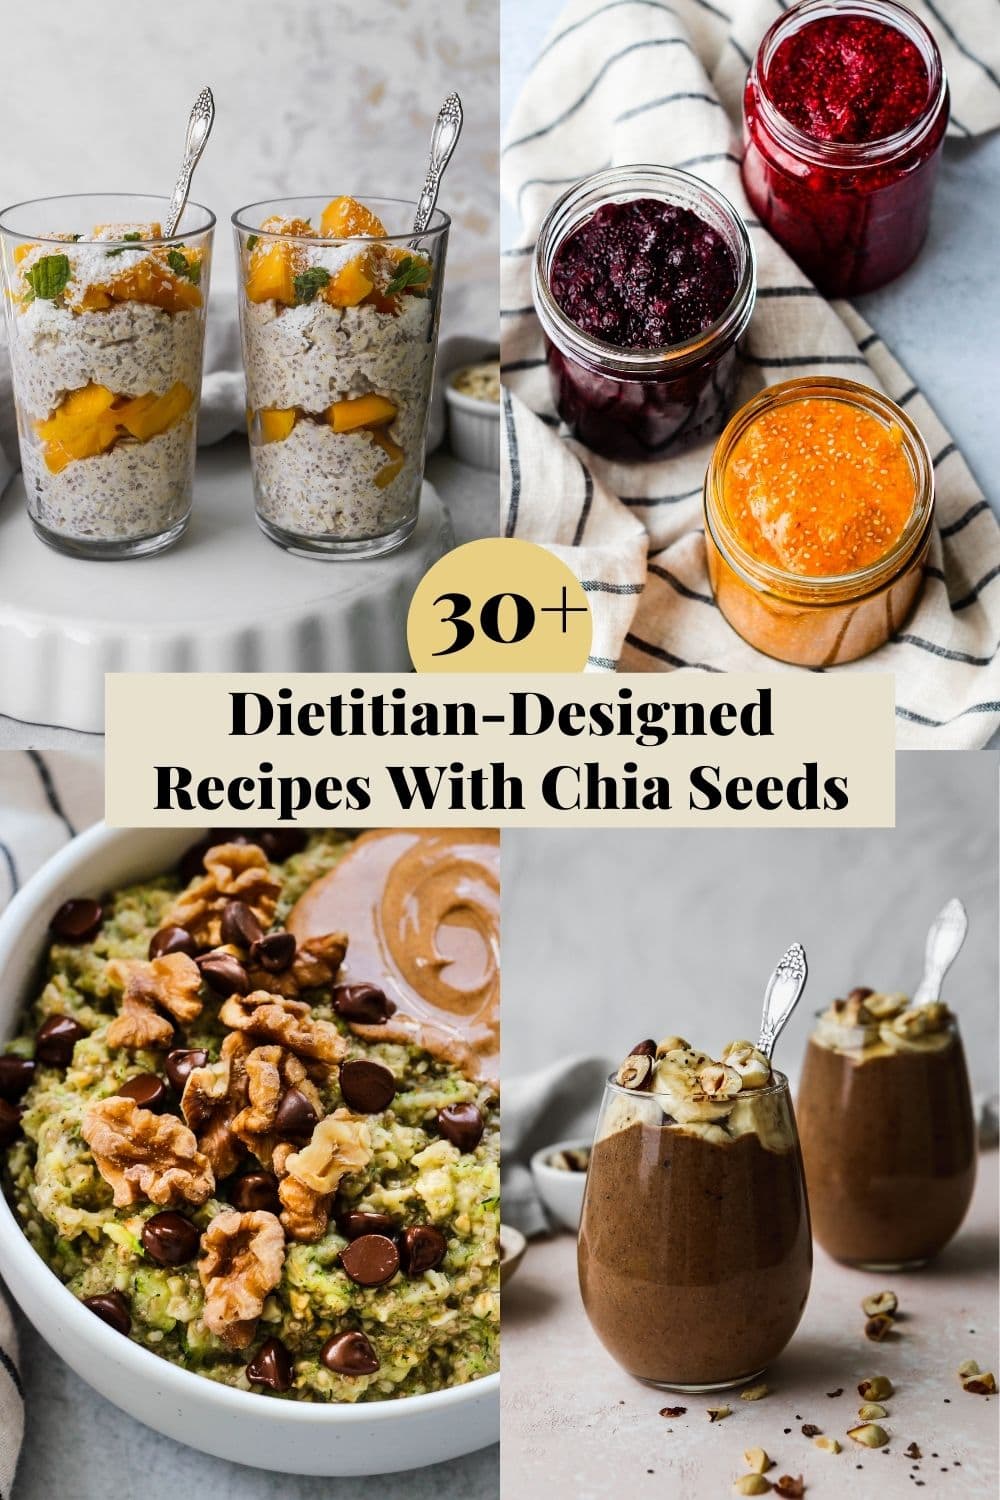 Intuición sobras Catedral 30+ Healthy Recipes With Chia Seeds | Walder Wellness, Dietitian (RD)